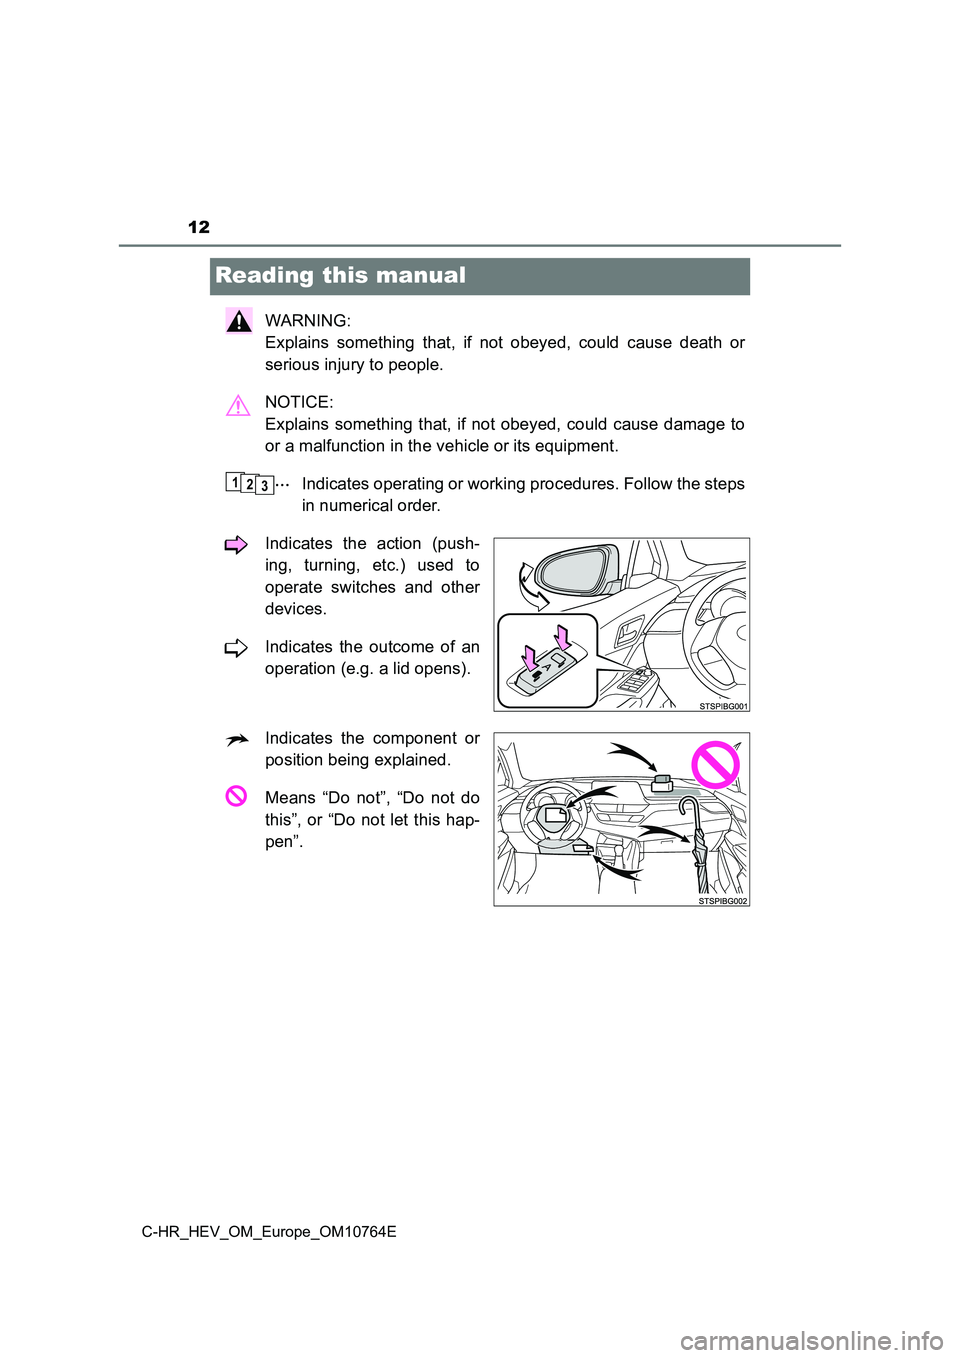 TOYOTA C-HR 2023  Owners Manual 12
C-HR_HEV_OM_Europe_OM10764E
Reading this manual
WARNING:  
Explains  something  that,  if  not  obeyed,  could  cause  death  or 
serious injury to people. 
NOTICE:  
Explains  something that, if  